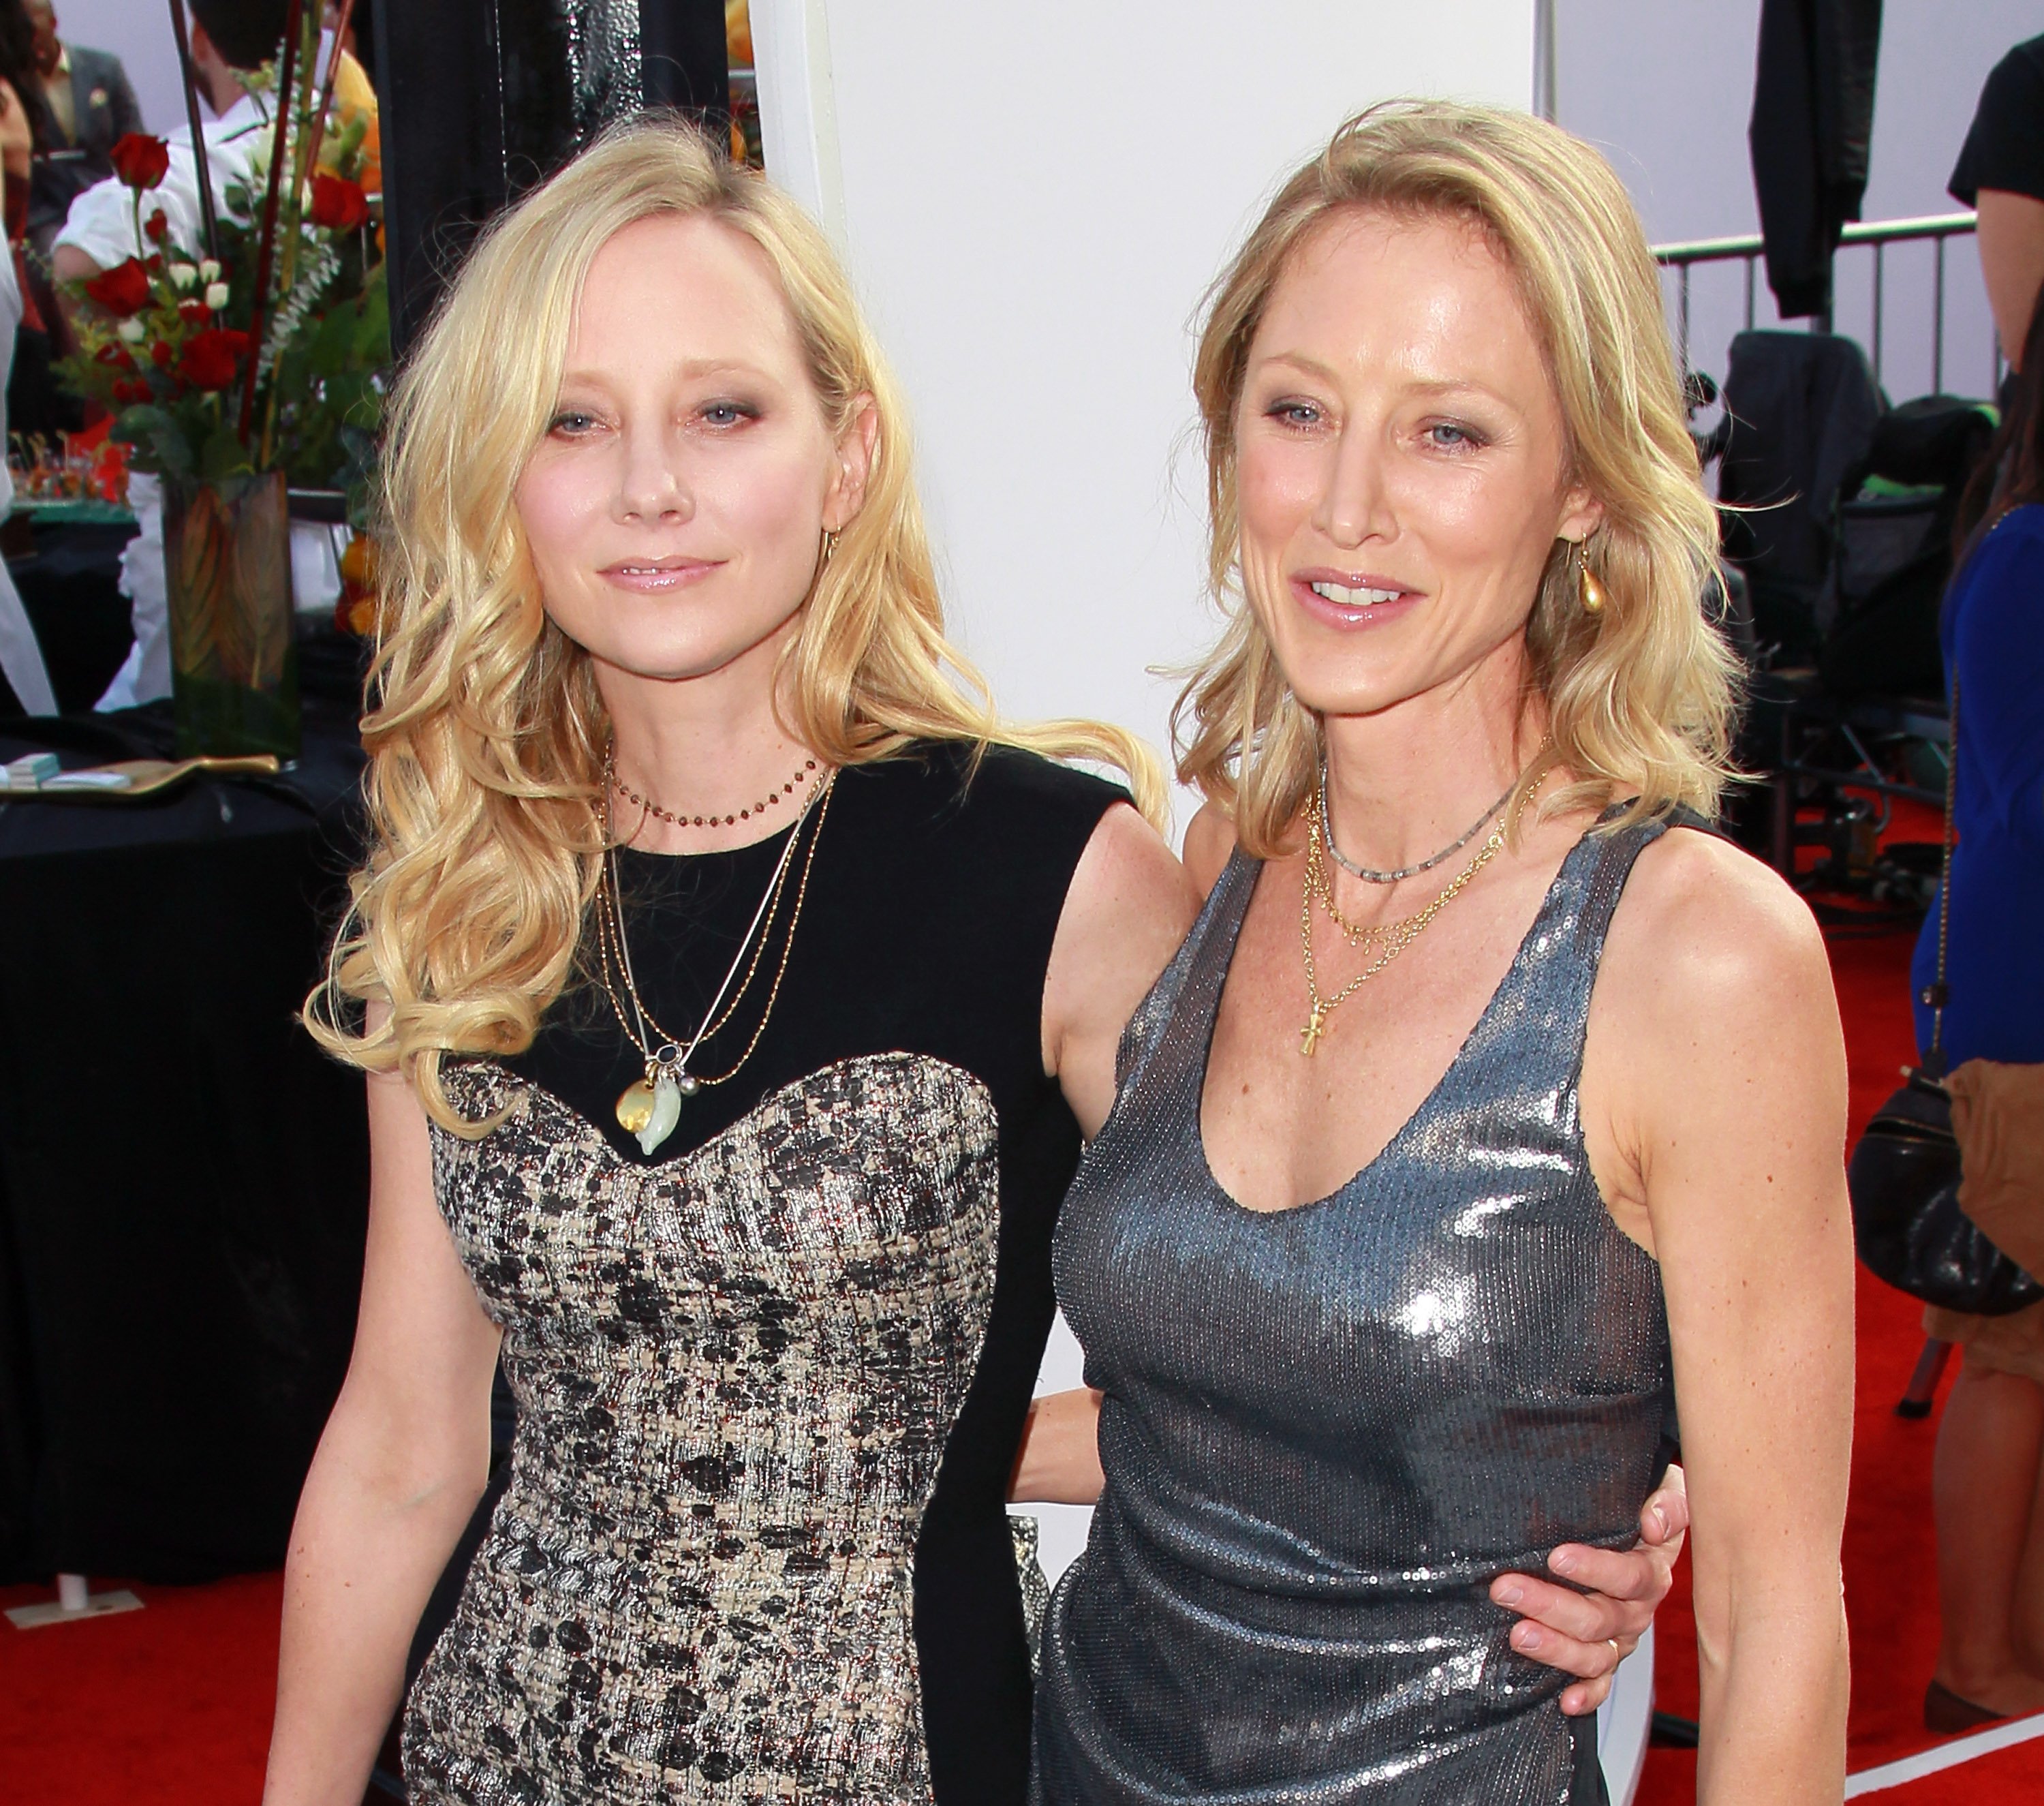 Anne Heche and Abigail Heche attend the premiere of "IRIS - A Journey Through the World of Cinema" By Cirque du Soleil